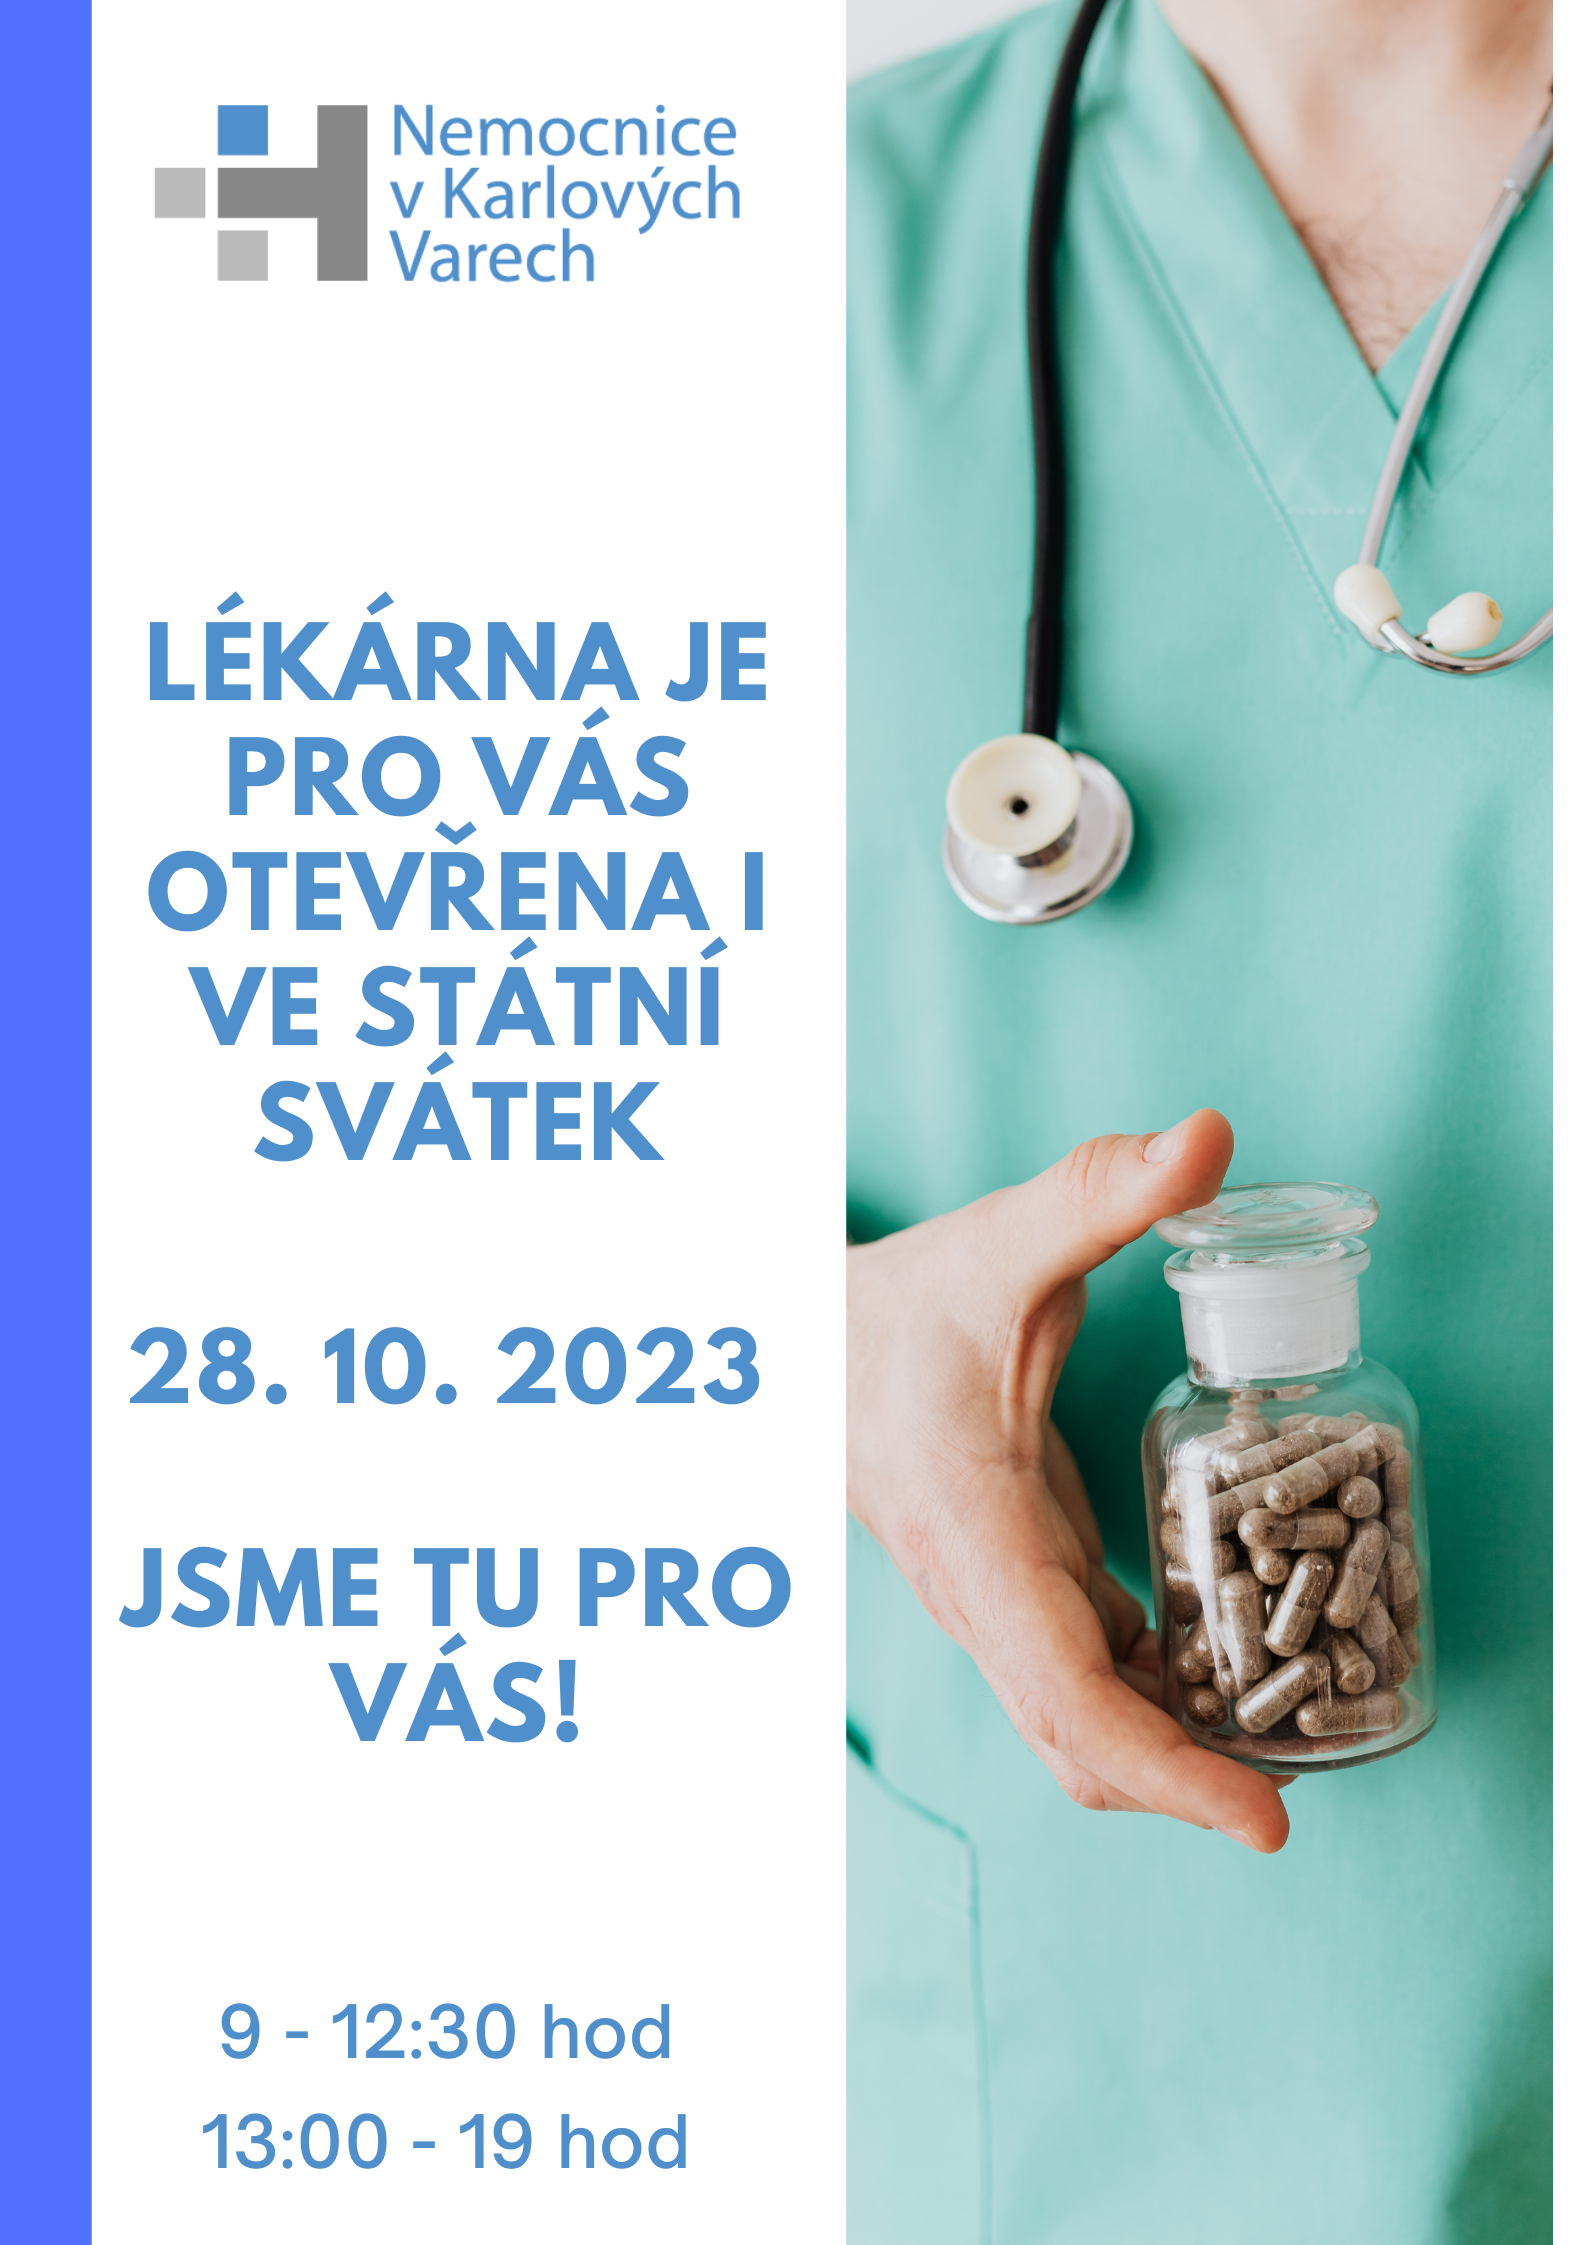 Teal Pharmacy Small Business Event Photo Poster 9